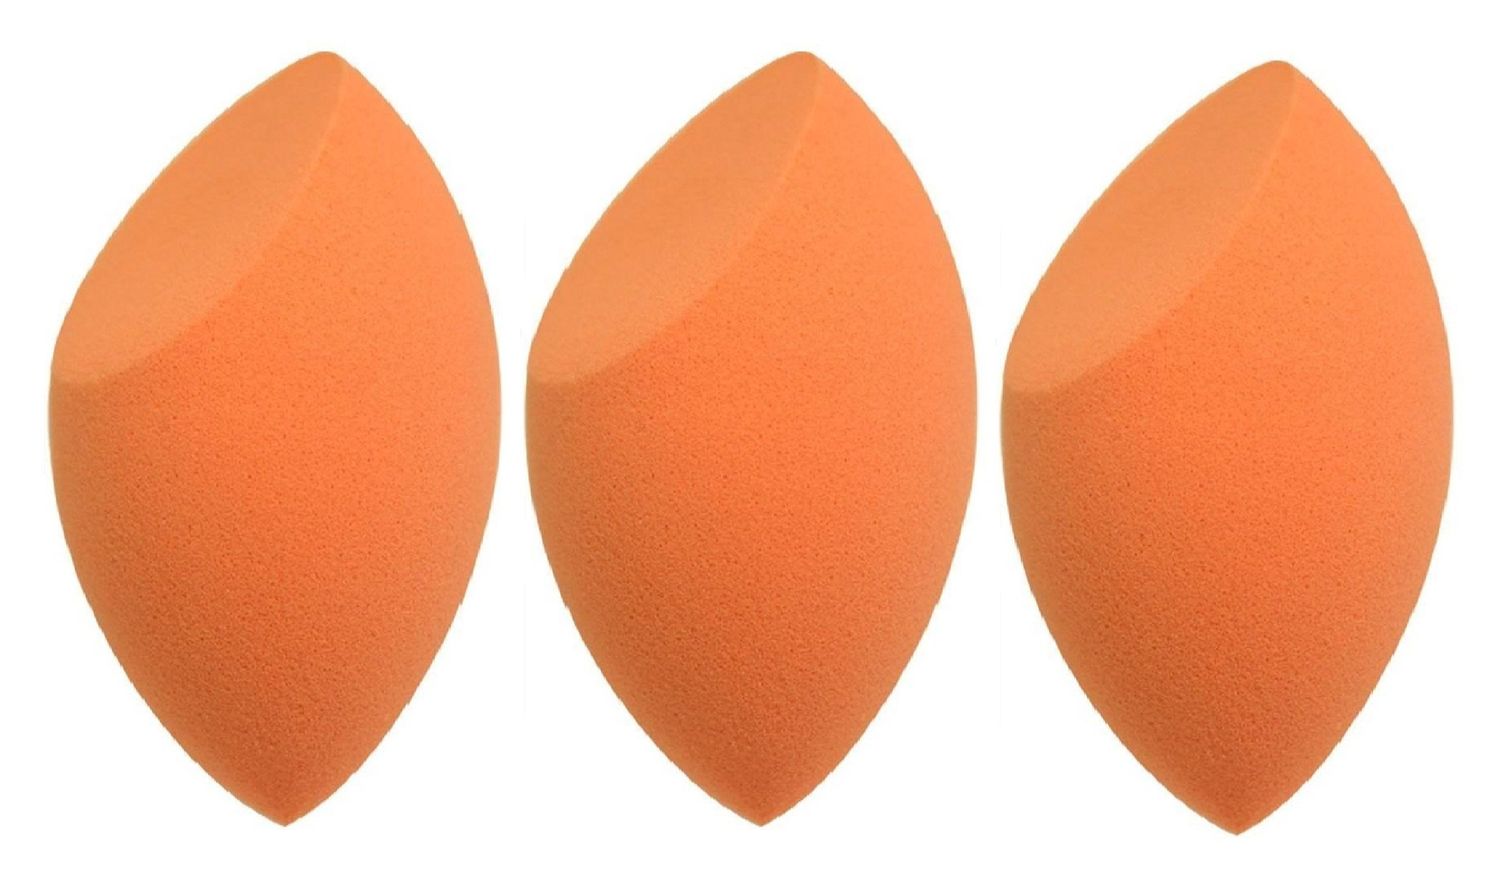 Buy AY Cut Shape Make up Sponge Puff (Colour may Vary) - Pack of 3 Piece - Purplle